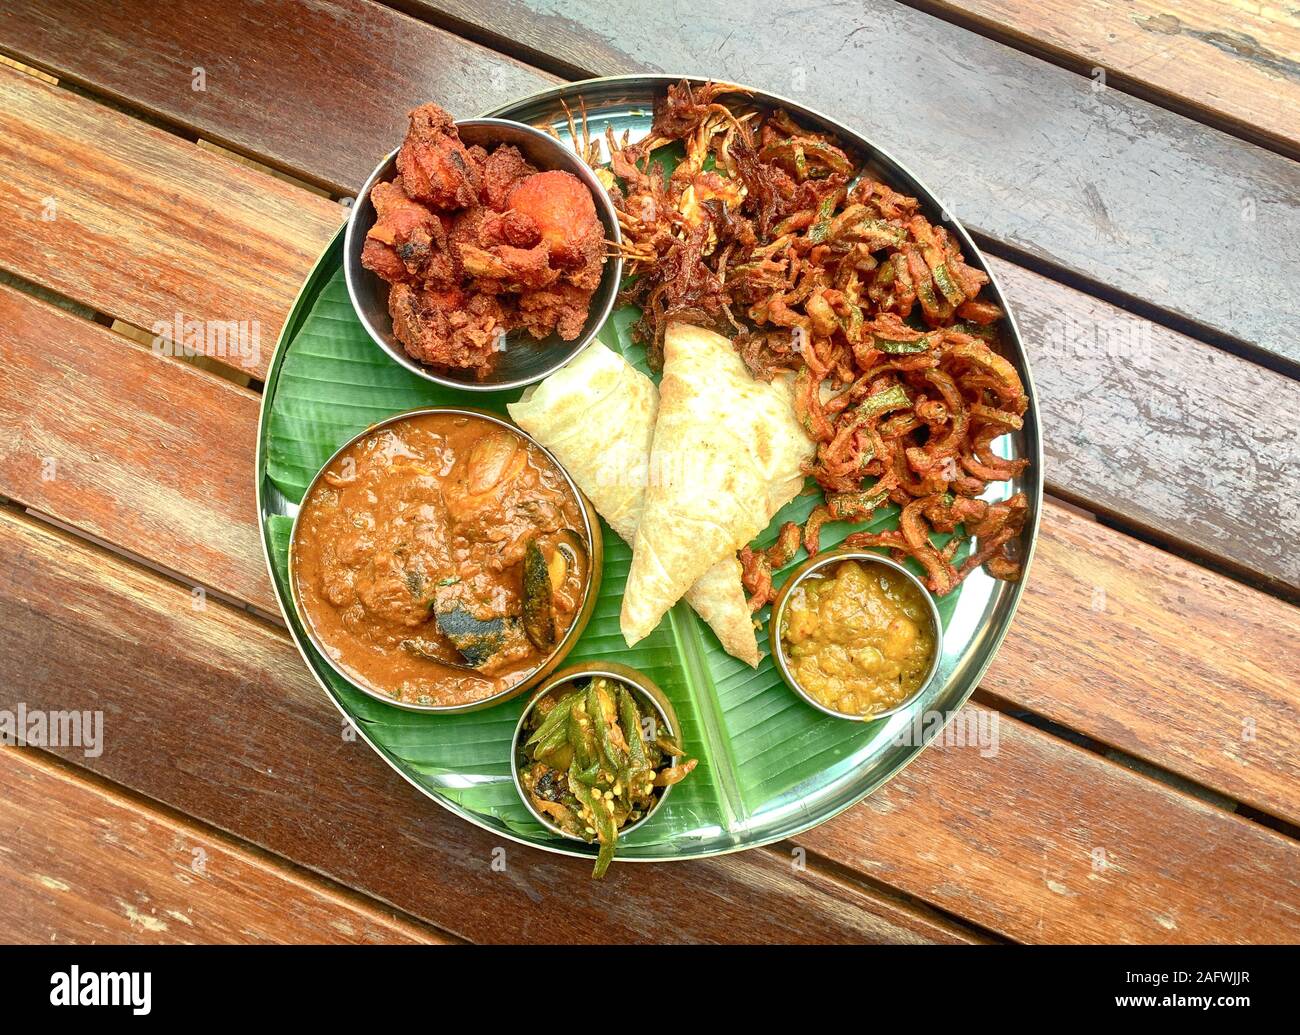 Delicious banana leaf dish, consists of fried chicken, curry seafood, lady fingers, potatoes and canai Stock Photo